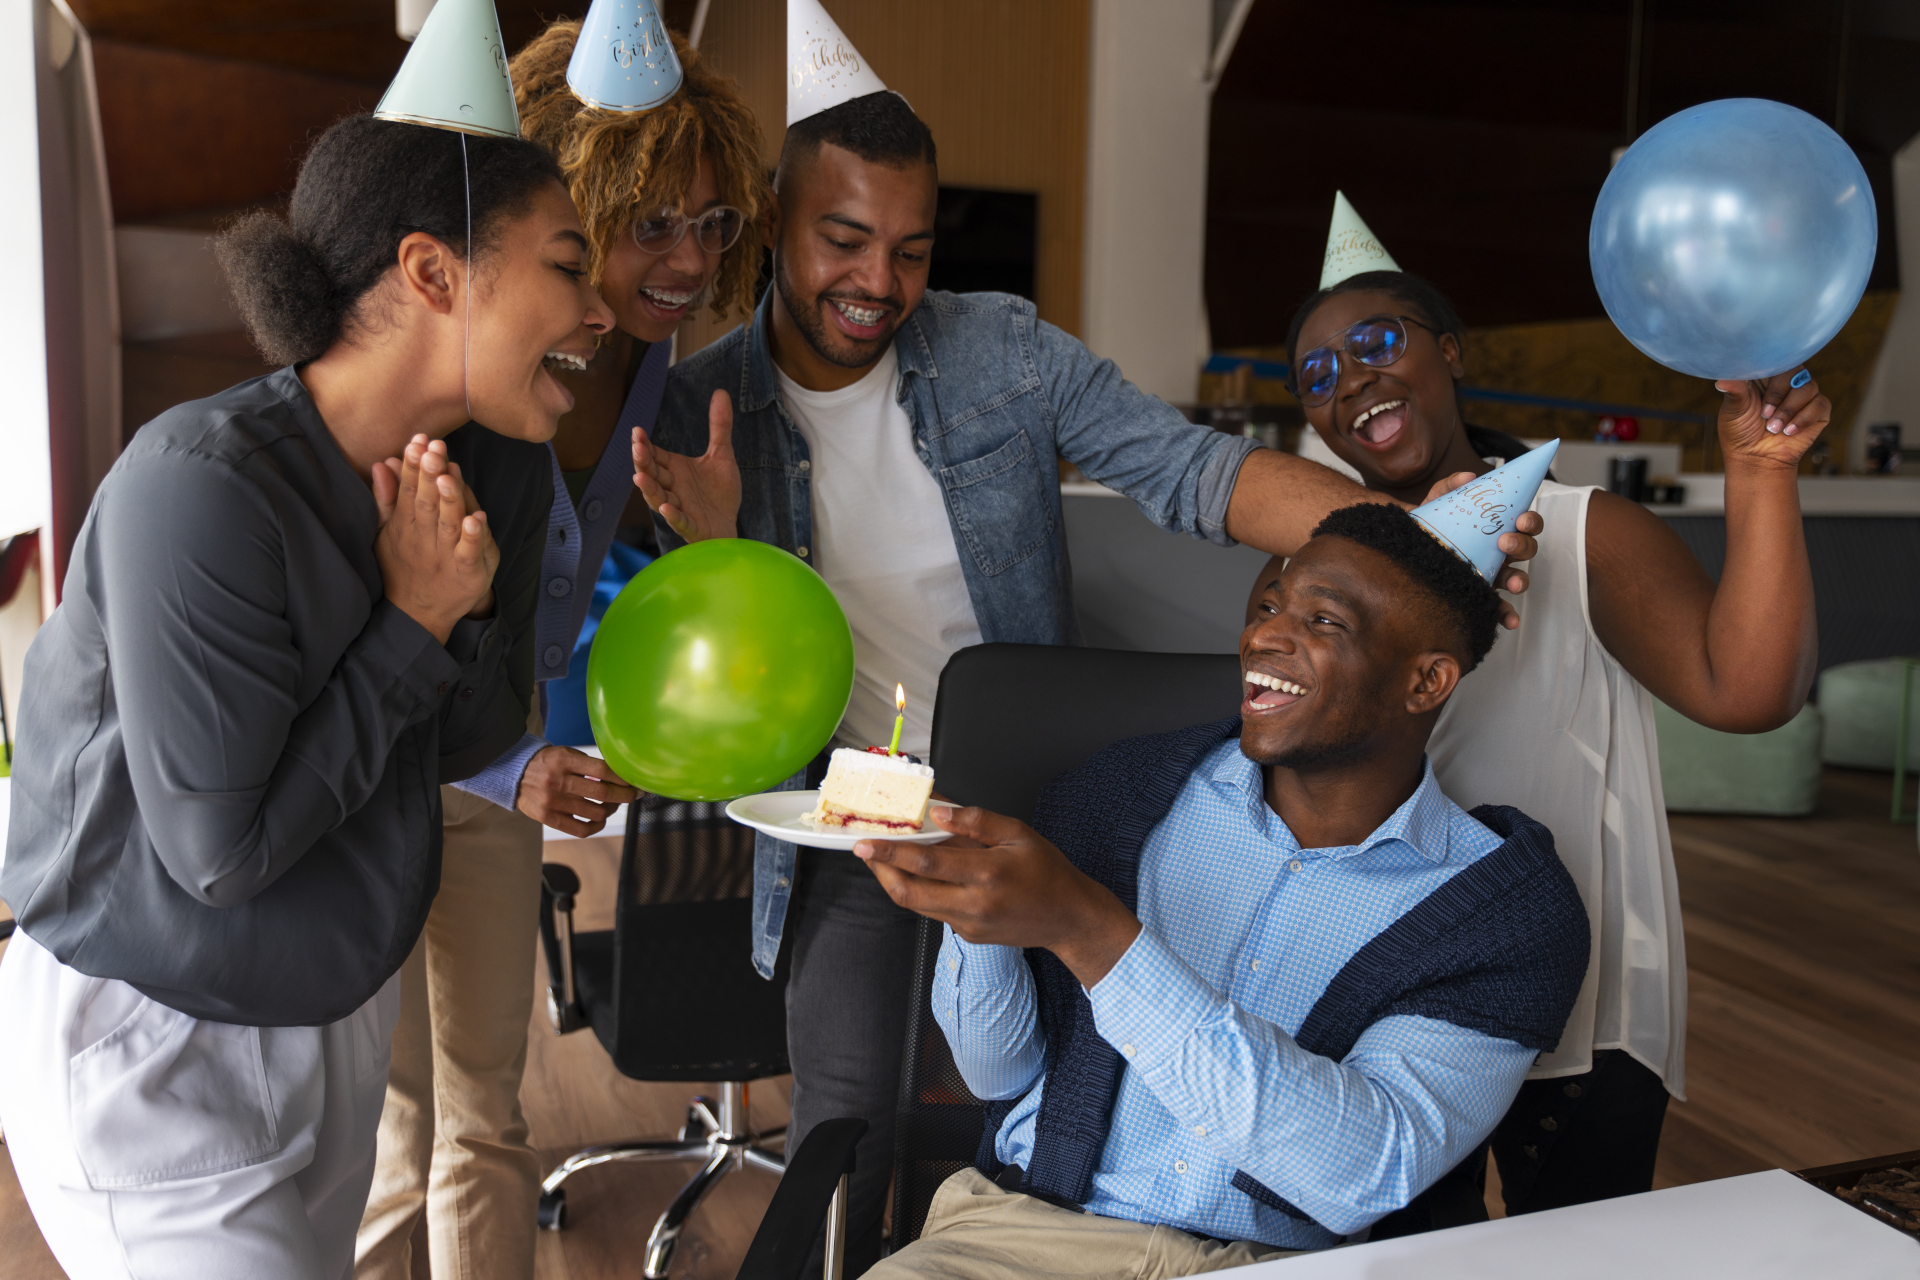 office-coworkers-celebrating-event-with-balloons-ics-digital